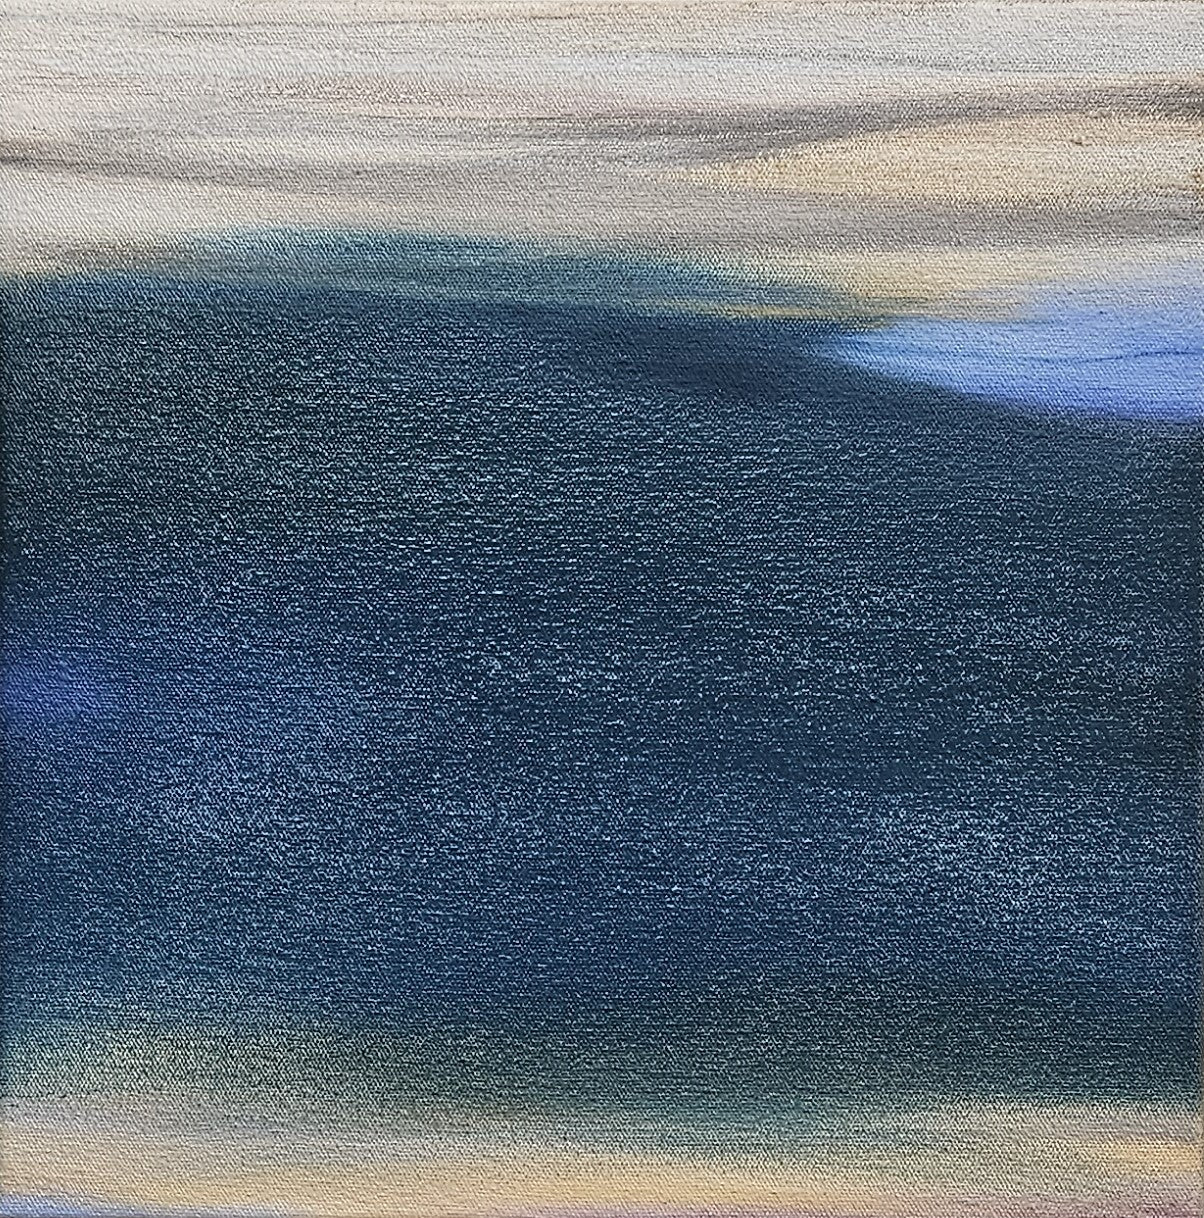 'WAVES' oil on canvas